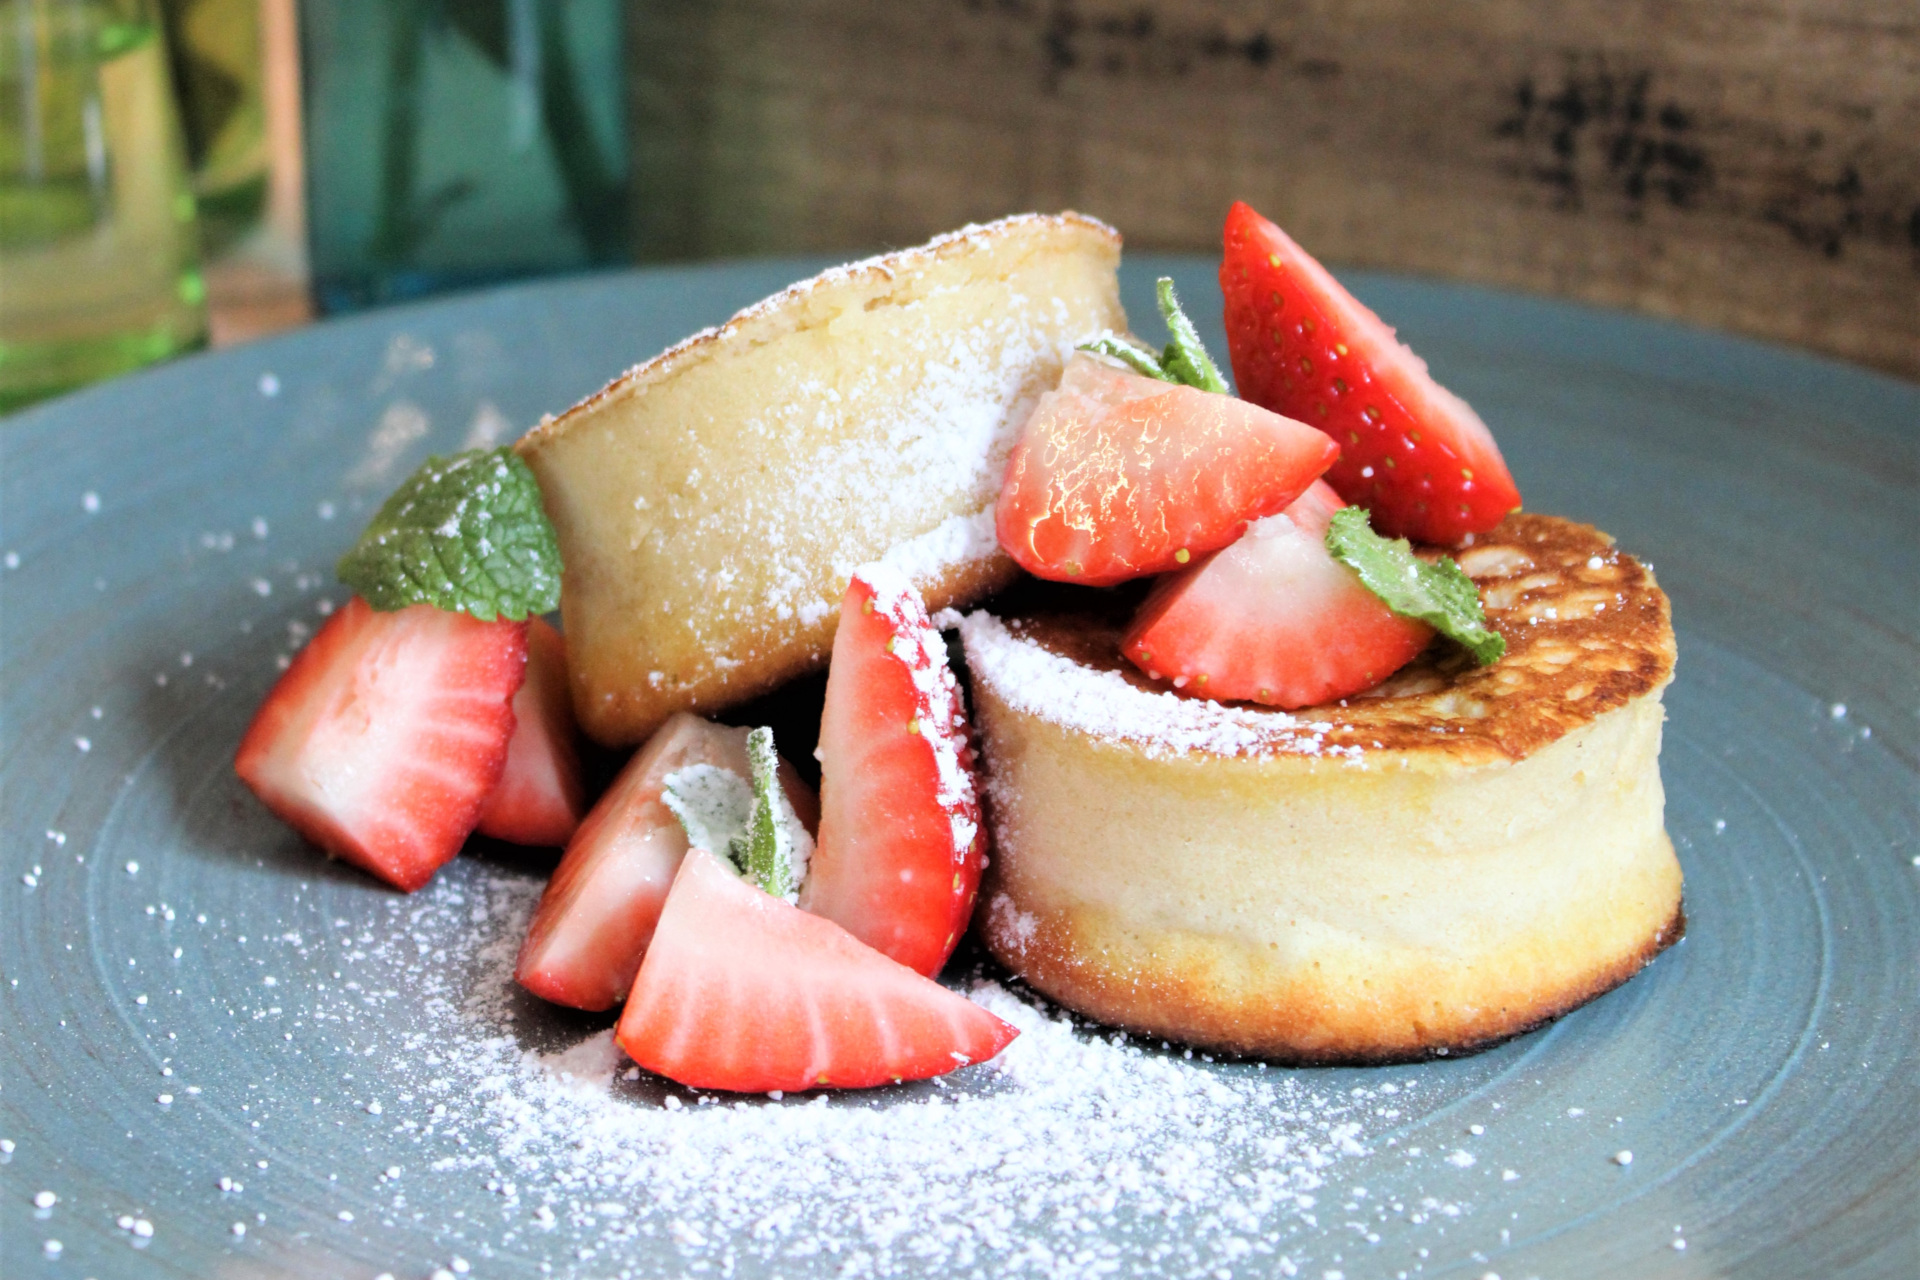 Fluffy Japanese Pancakes with strawberries